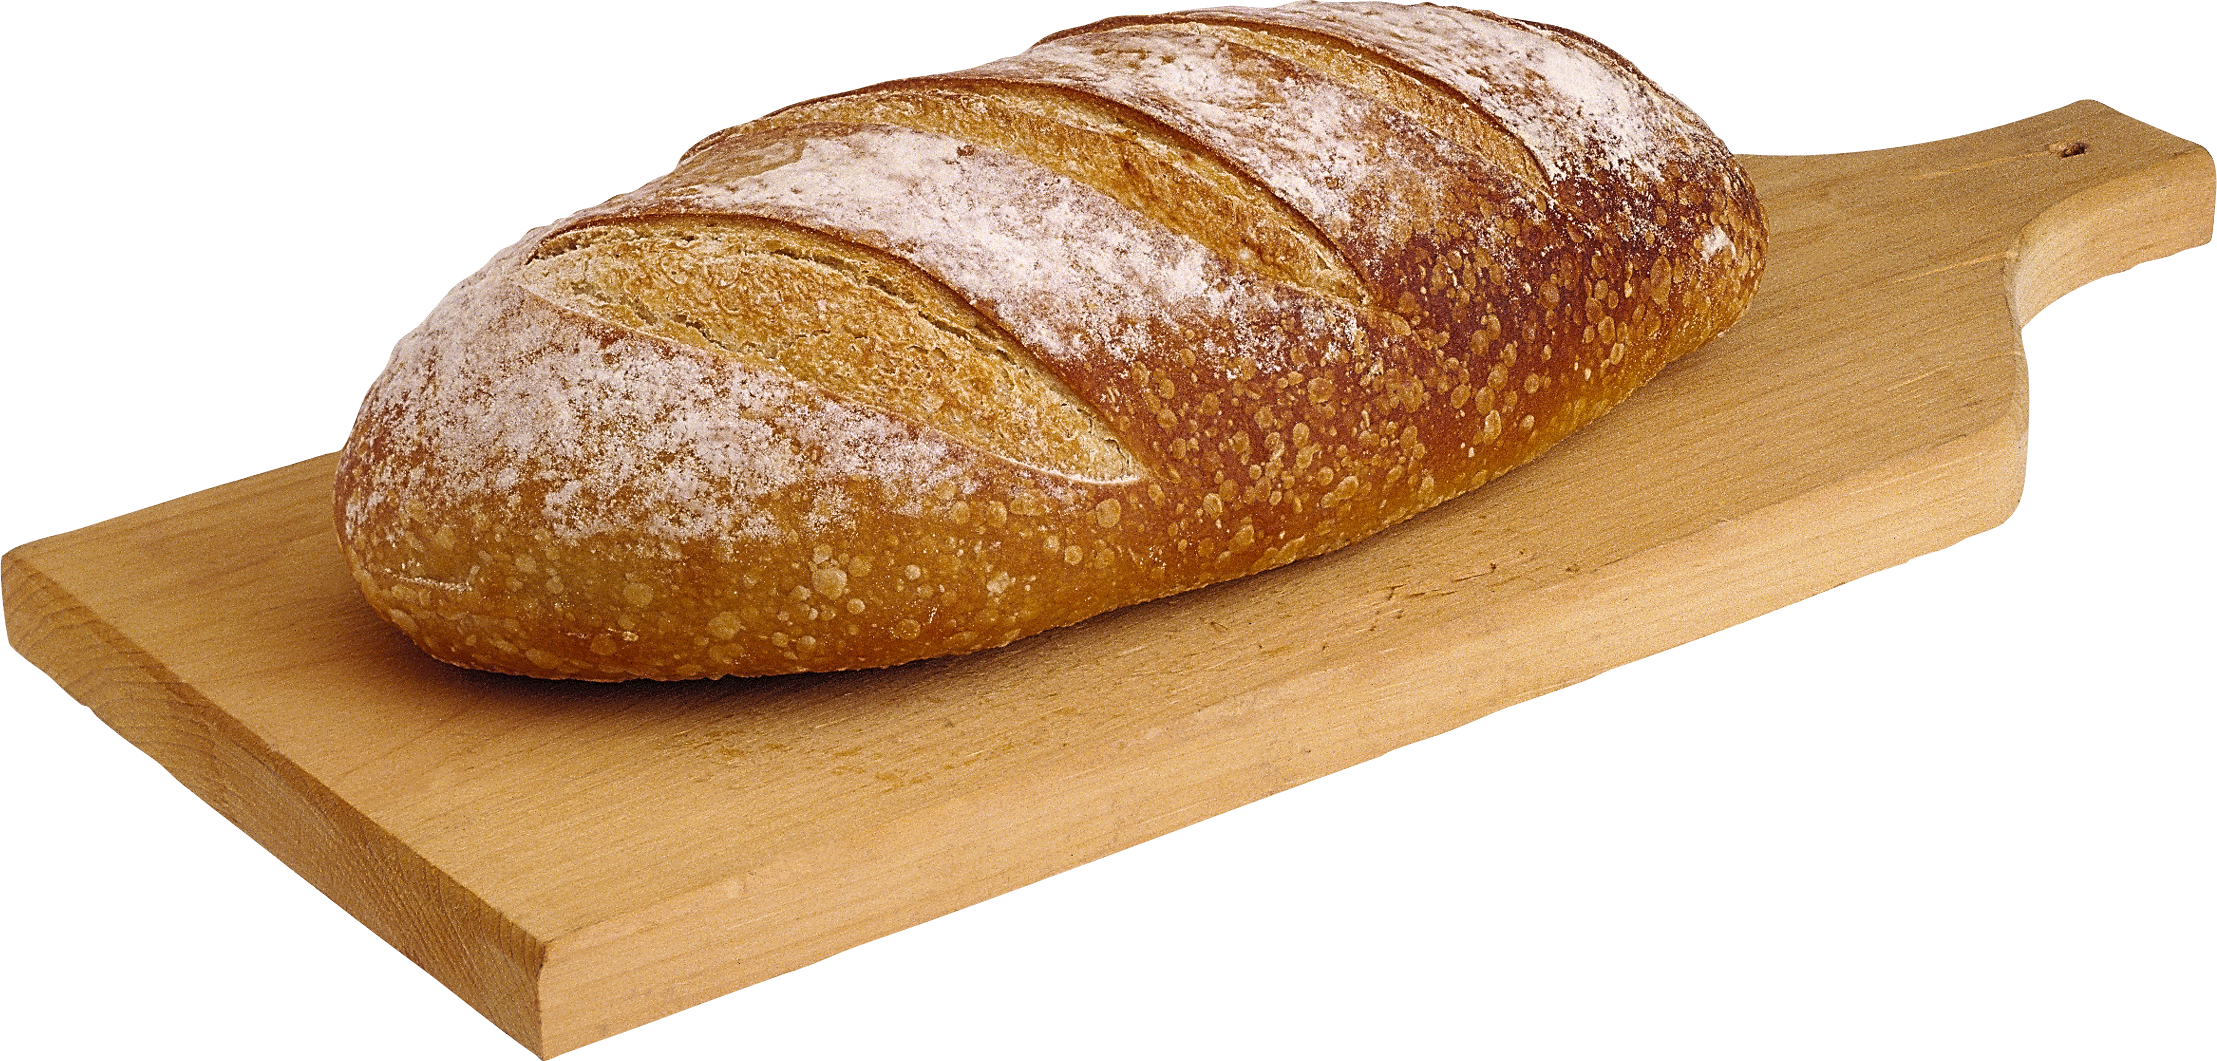 Bread PNG HD Images - 129486